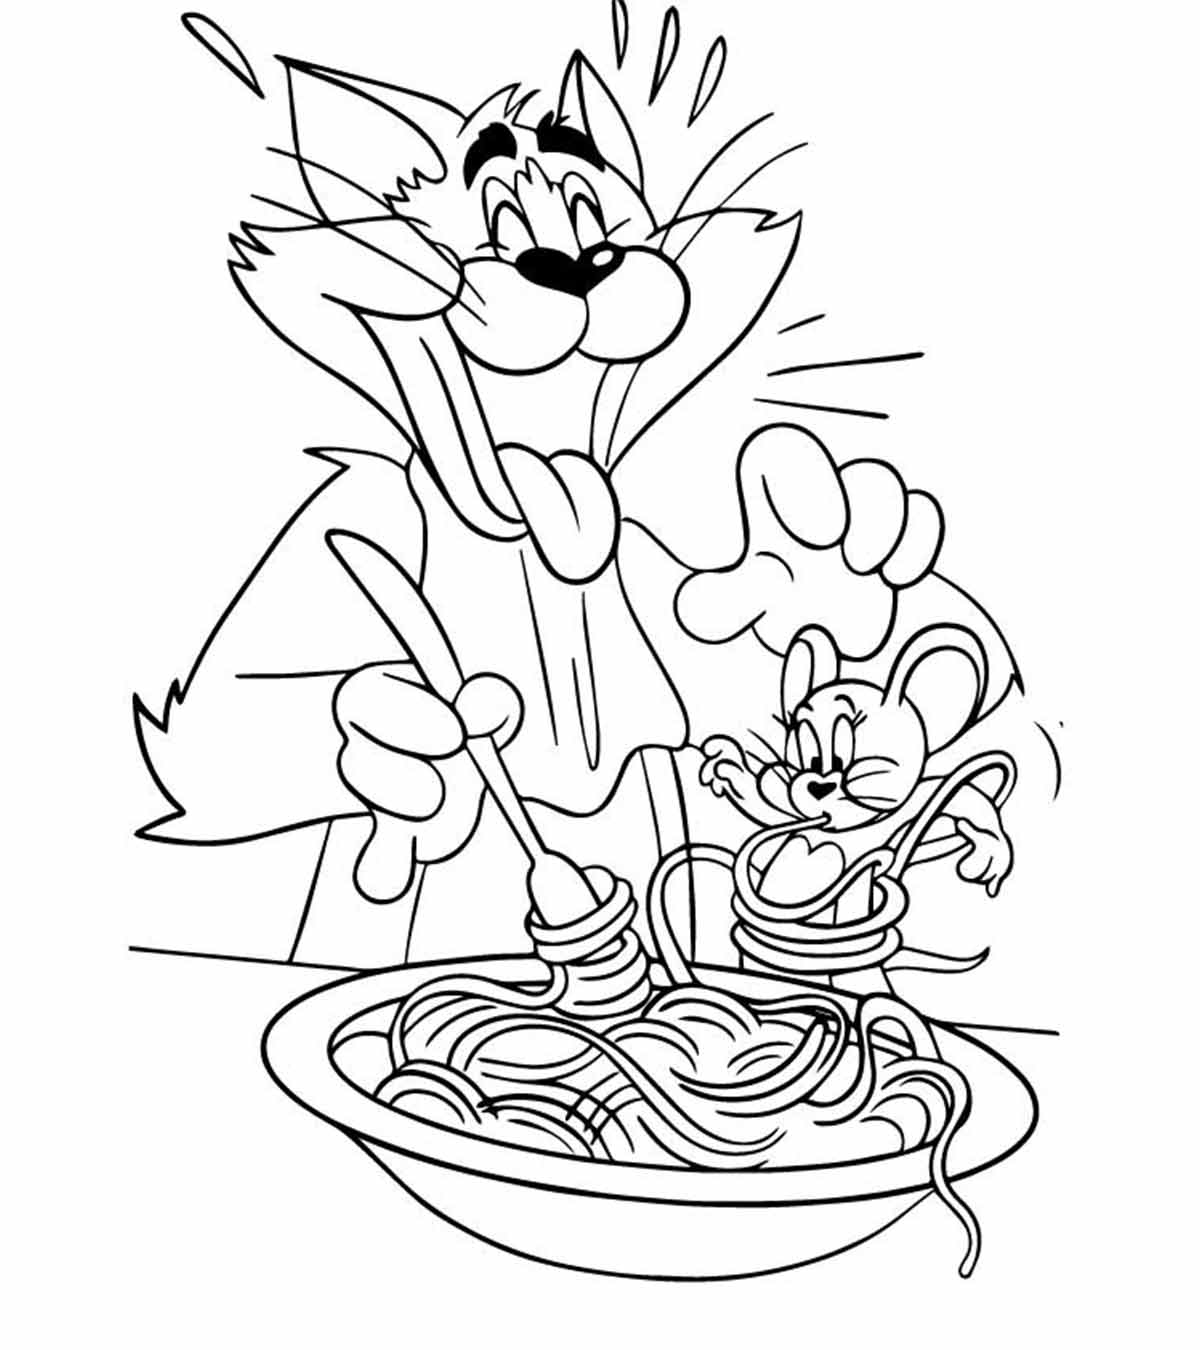 10 Cute Tom And Jerry Coloring Pages Your Toddler Will Love To Color_image